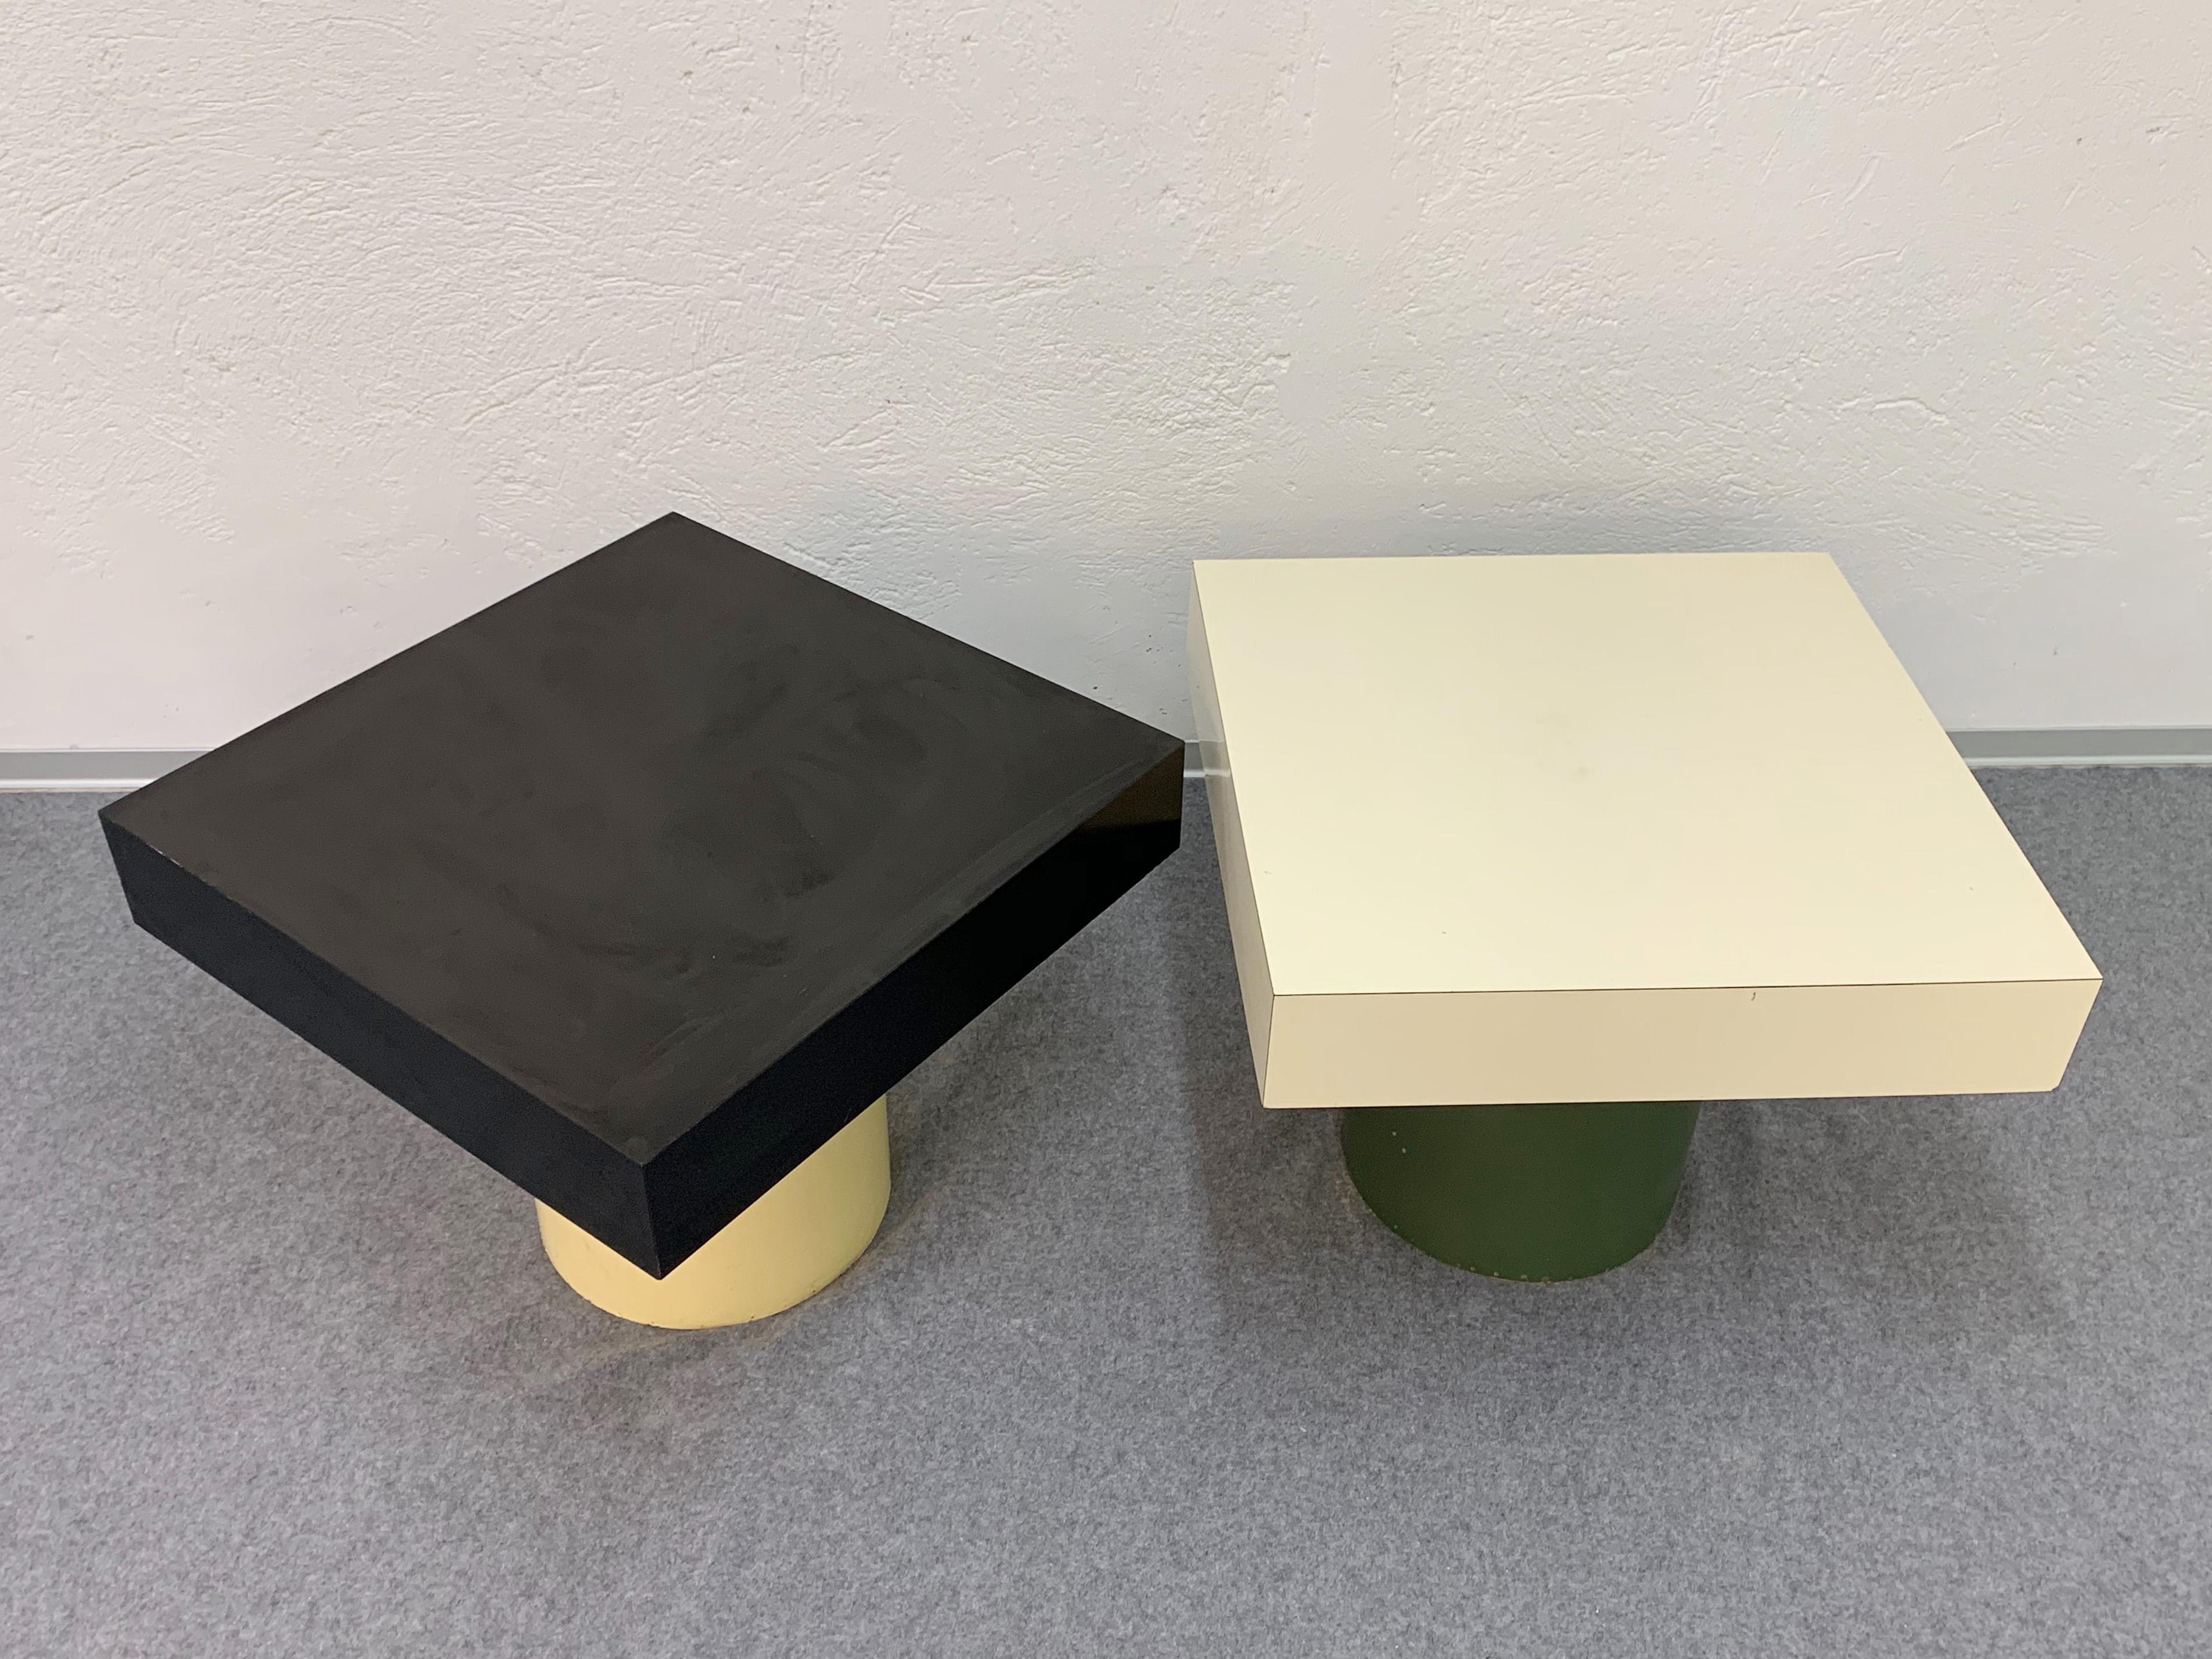 Italian Pair of Side Tables in Black and White Formica, Round Base, 1970s Italy Laminate